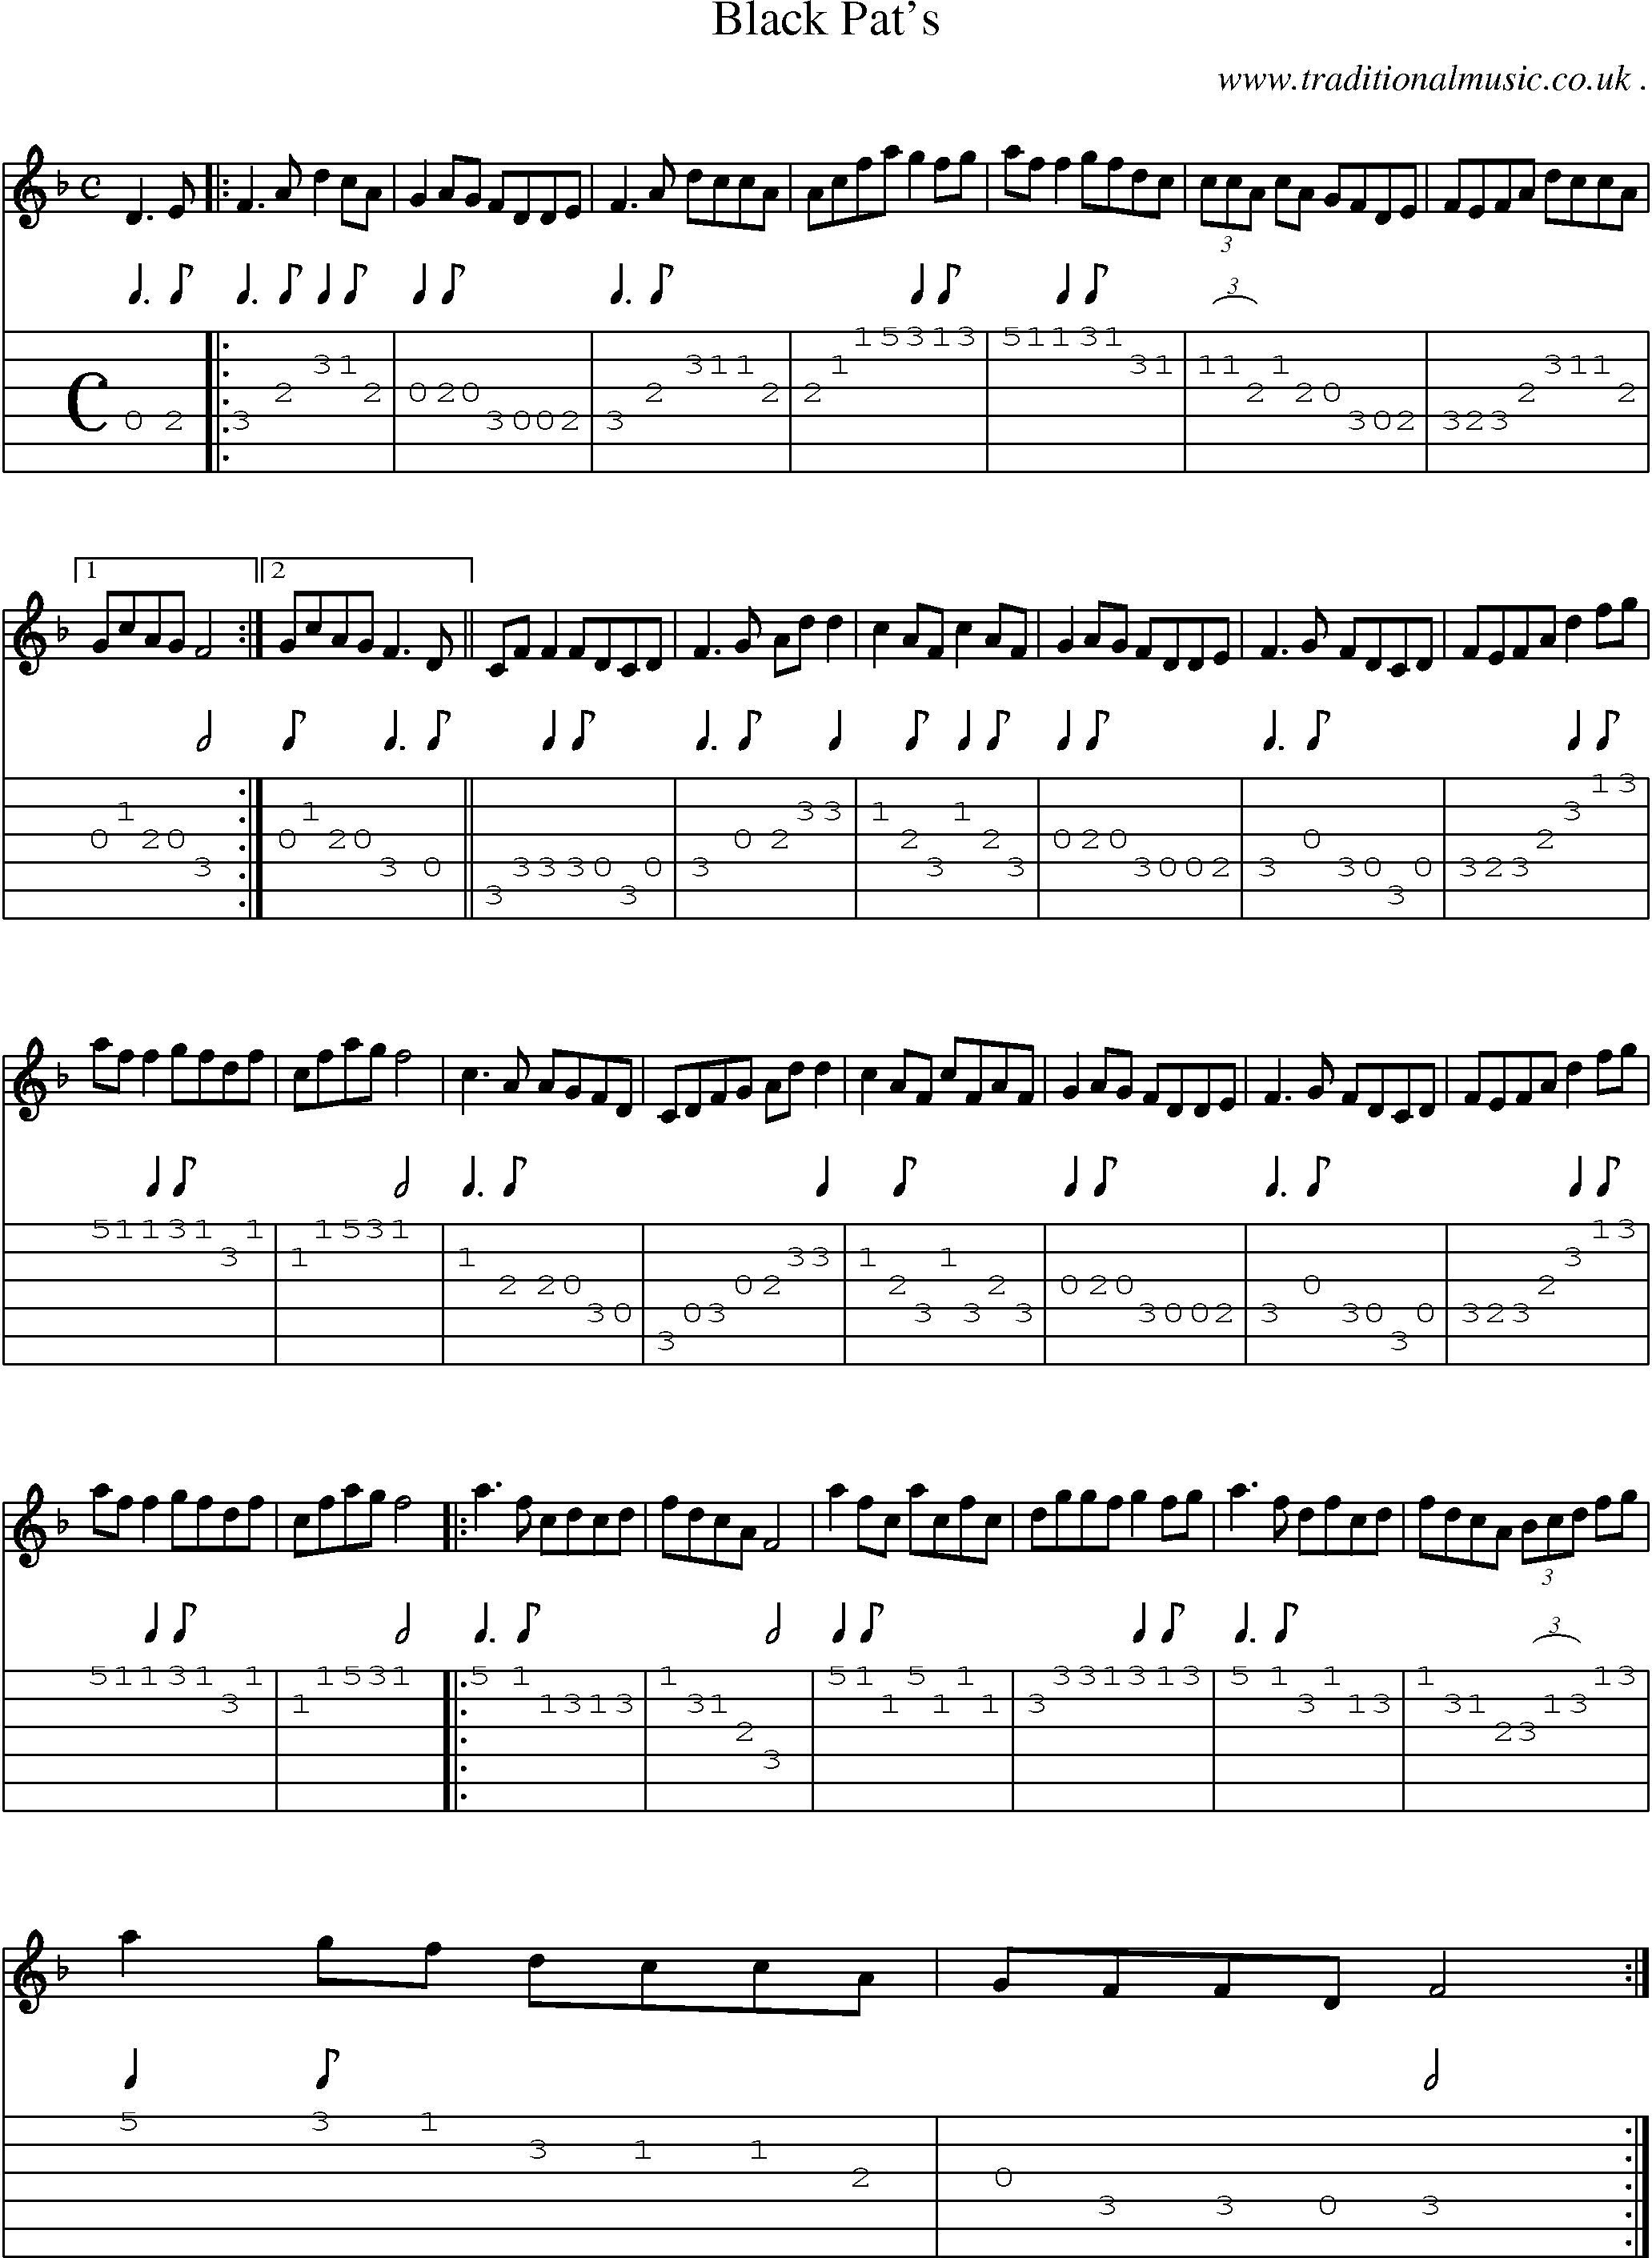 Sheet-Music and Guitar Tabs for Black Pats